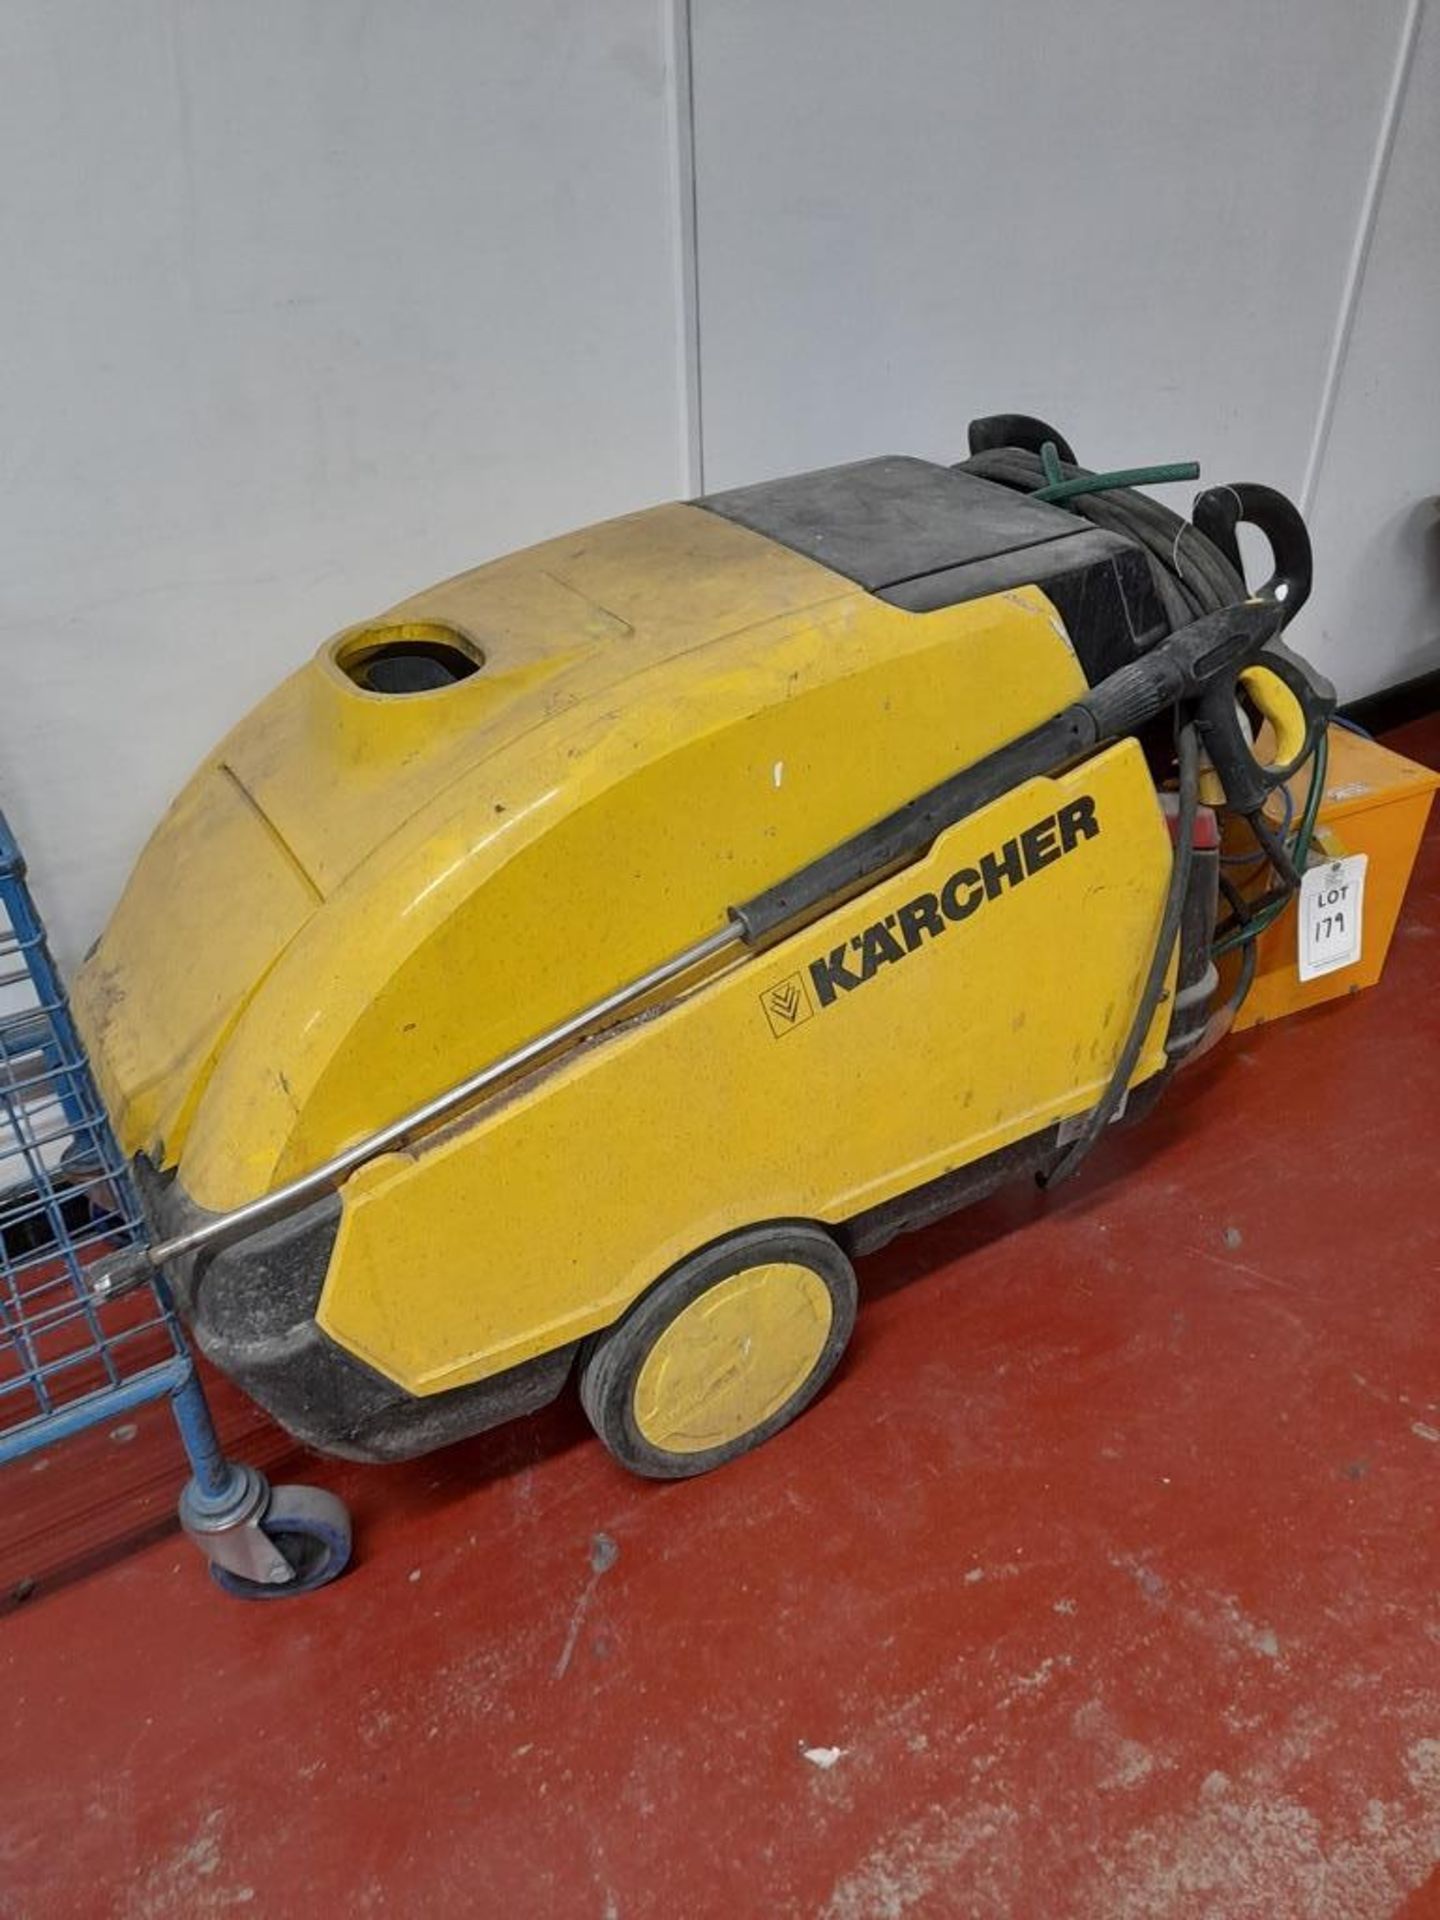 Karcher HDS 745 hot & cold pressure washer, single phase, with Protex transformer, as lotted